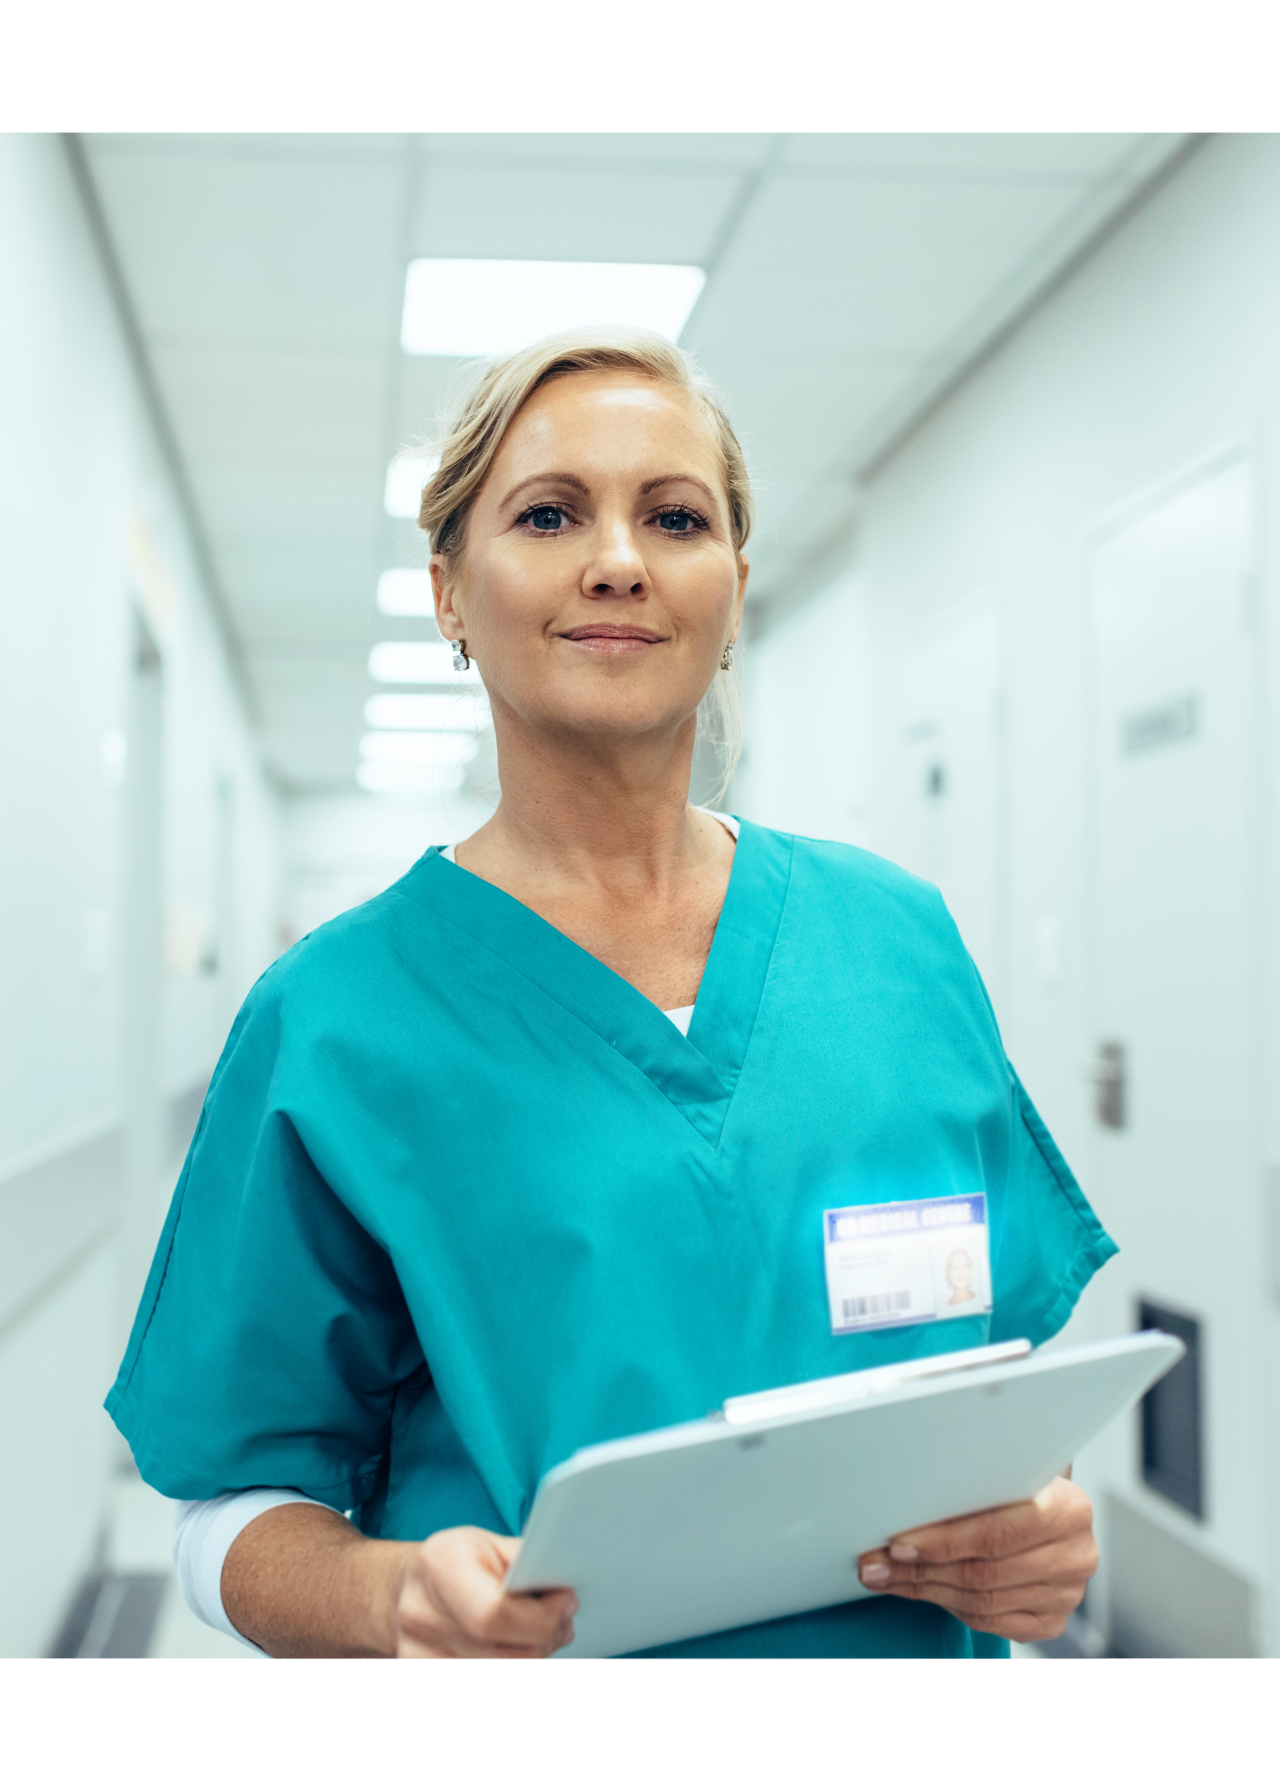 Portrait of mature female nurse working in hospital. Woman healthcare worker with clipboard in corridor.